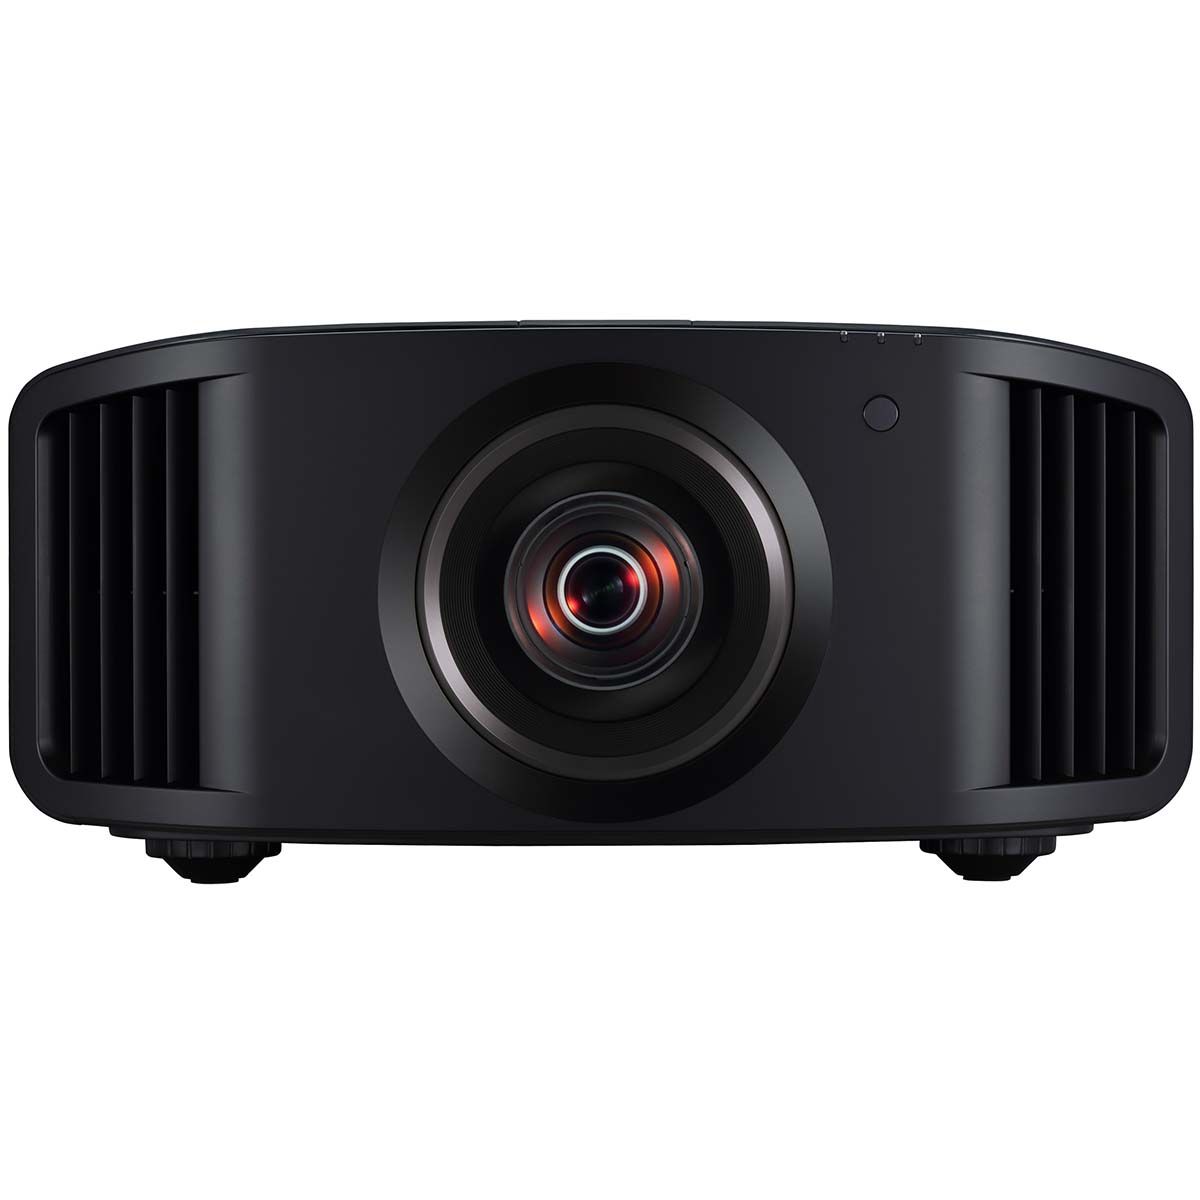 JVC DLA-NP5 4K Home Theater Projector, front view